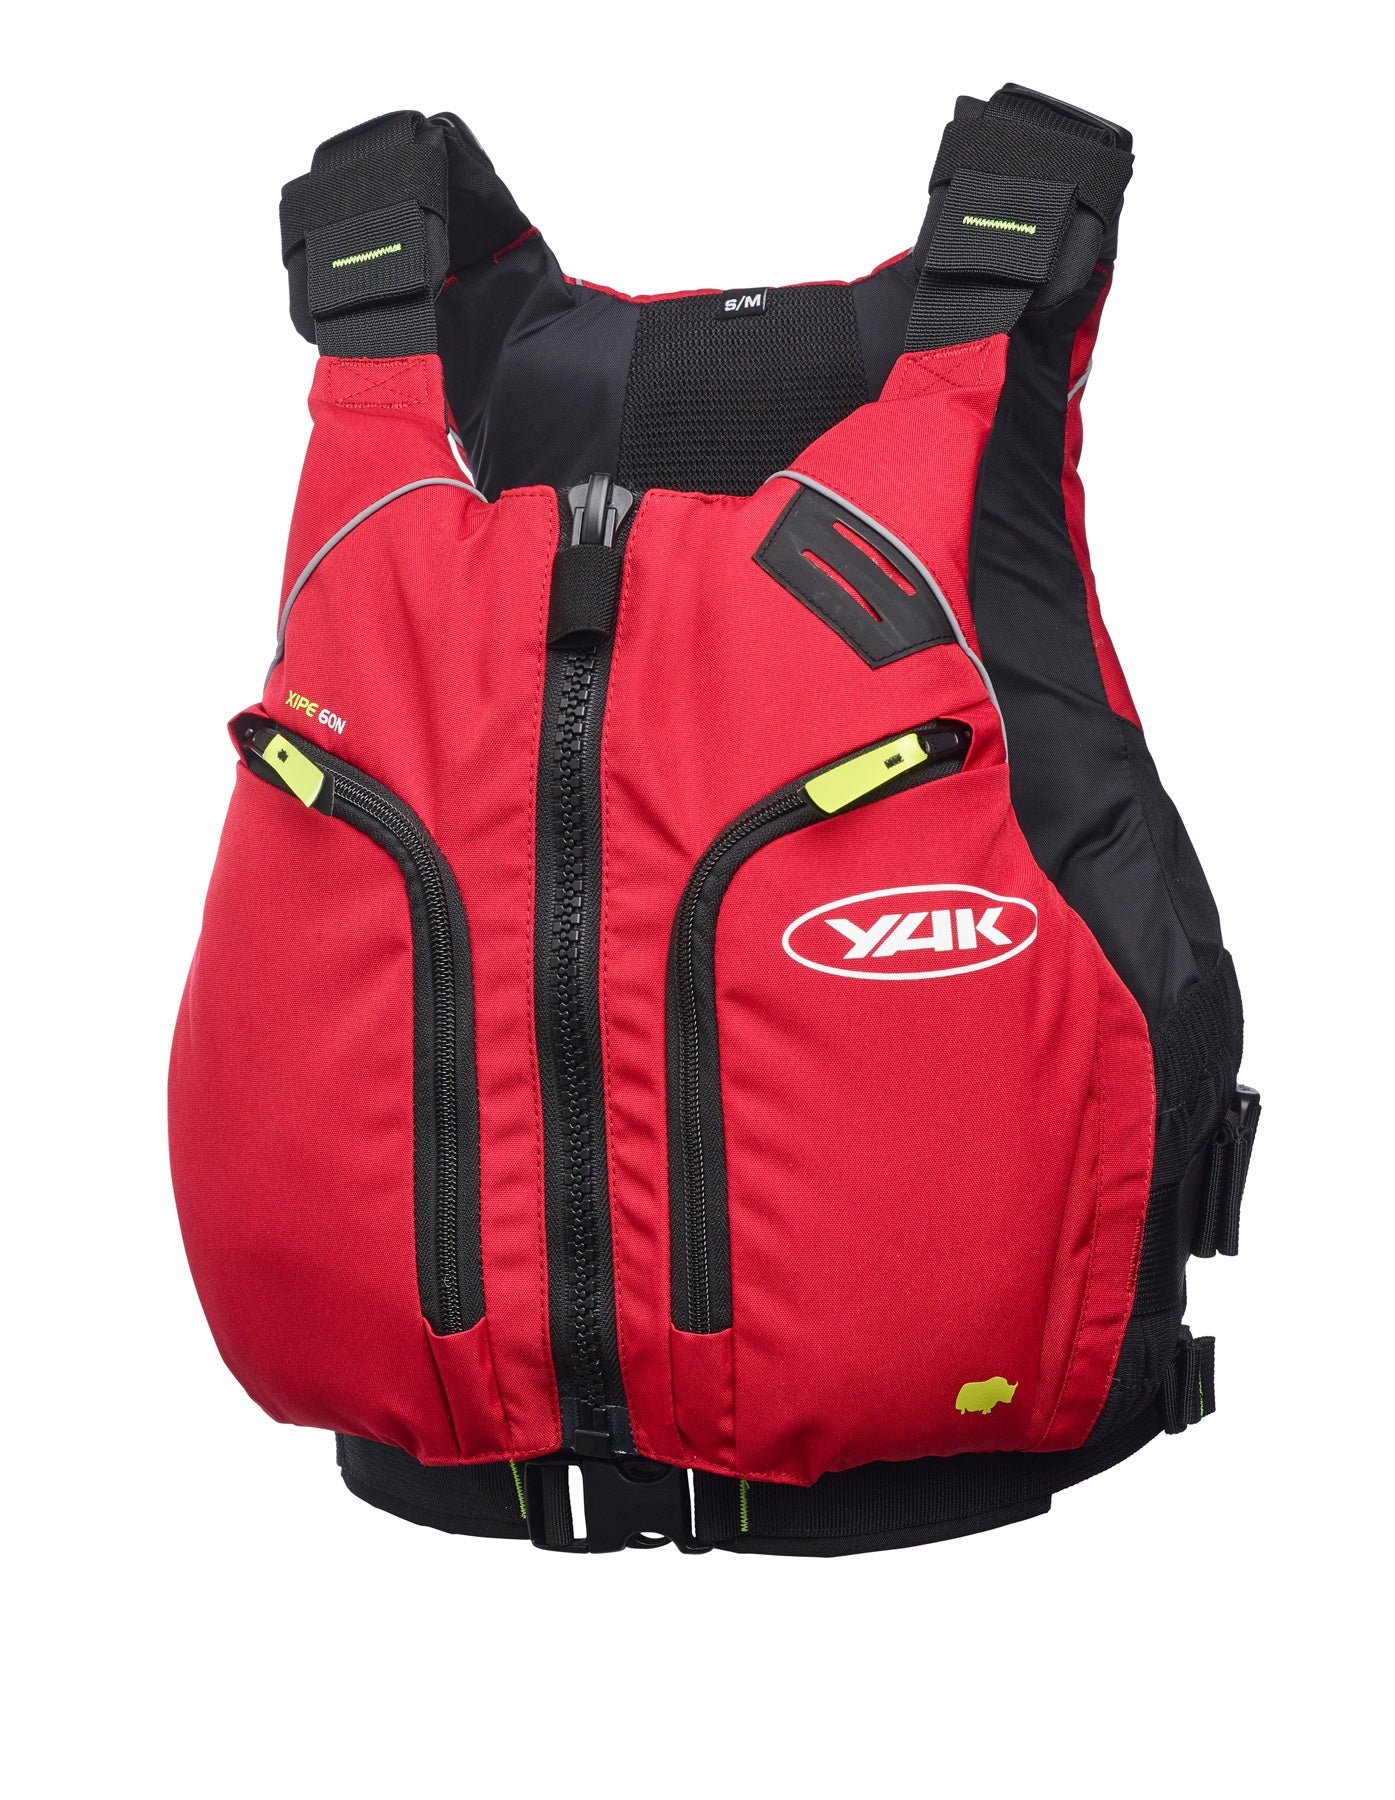 Yak Xipe Touring Buoyancy Aid - Red